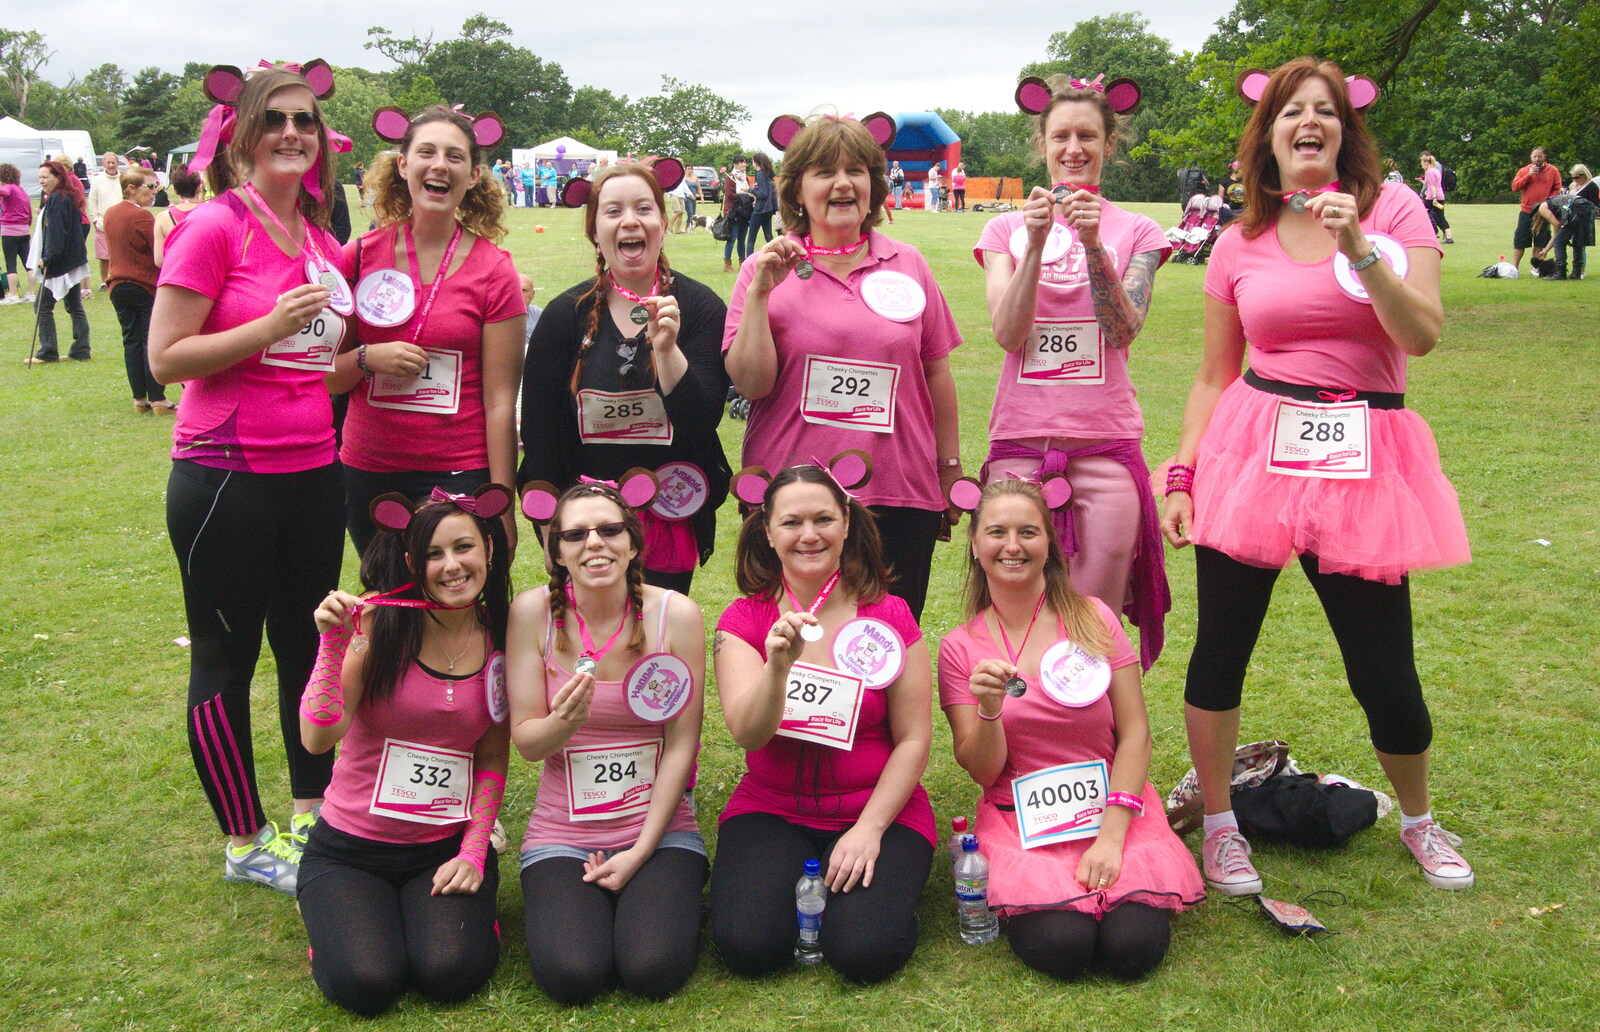 Nosher ligs a photo of the 'Cheeky Chimpettes'  from Isobel's Race For Life, Chantry Park, Ipswich - 11th June 2014